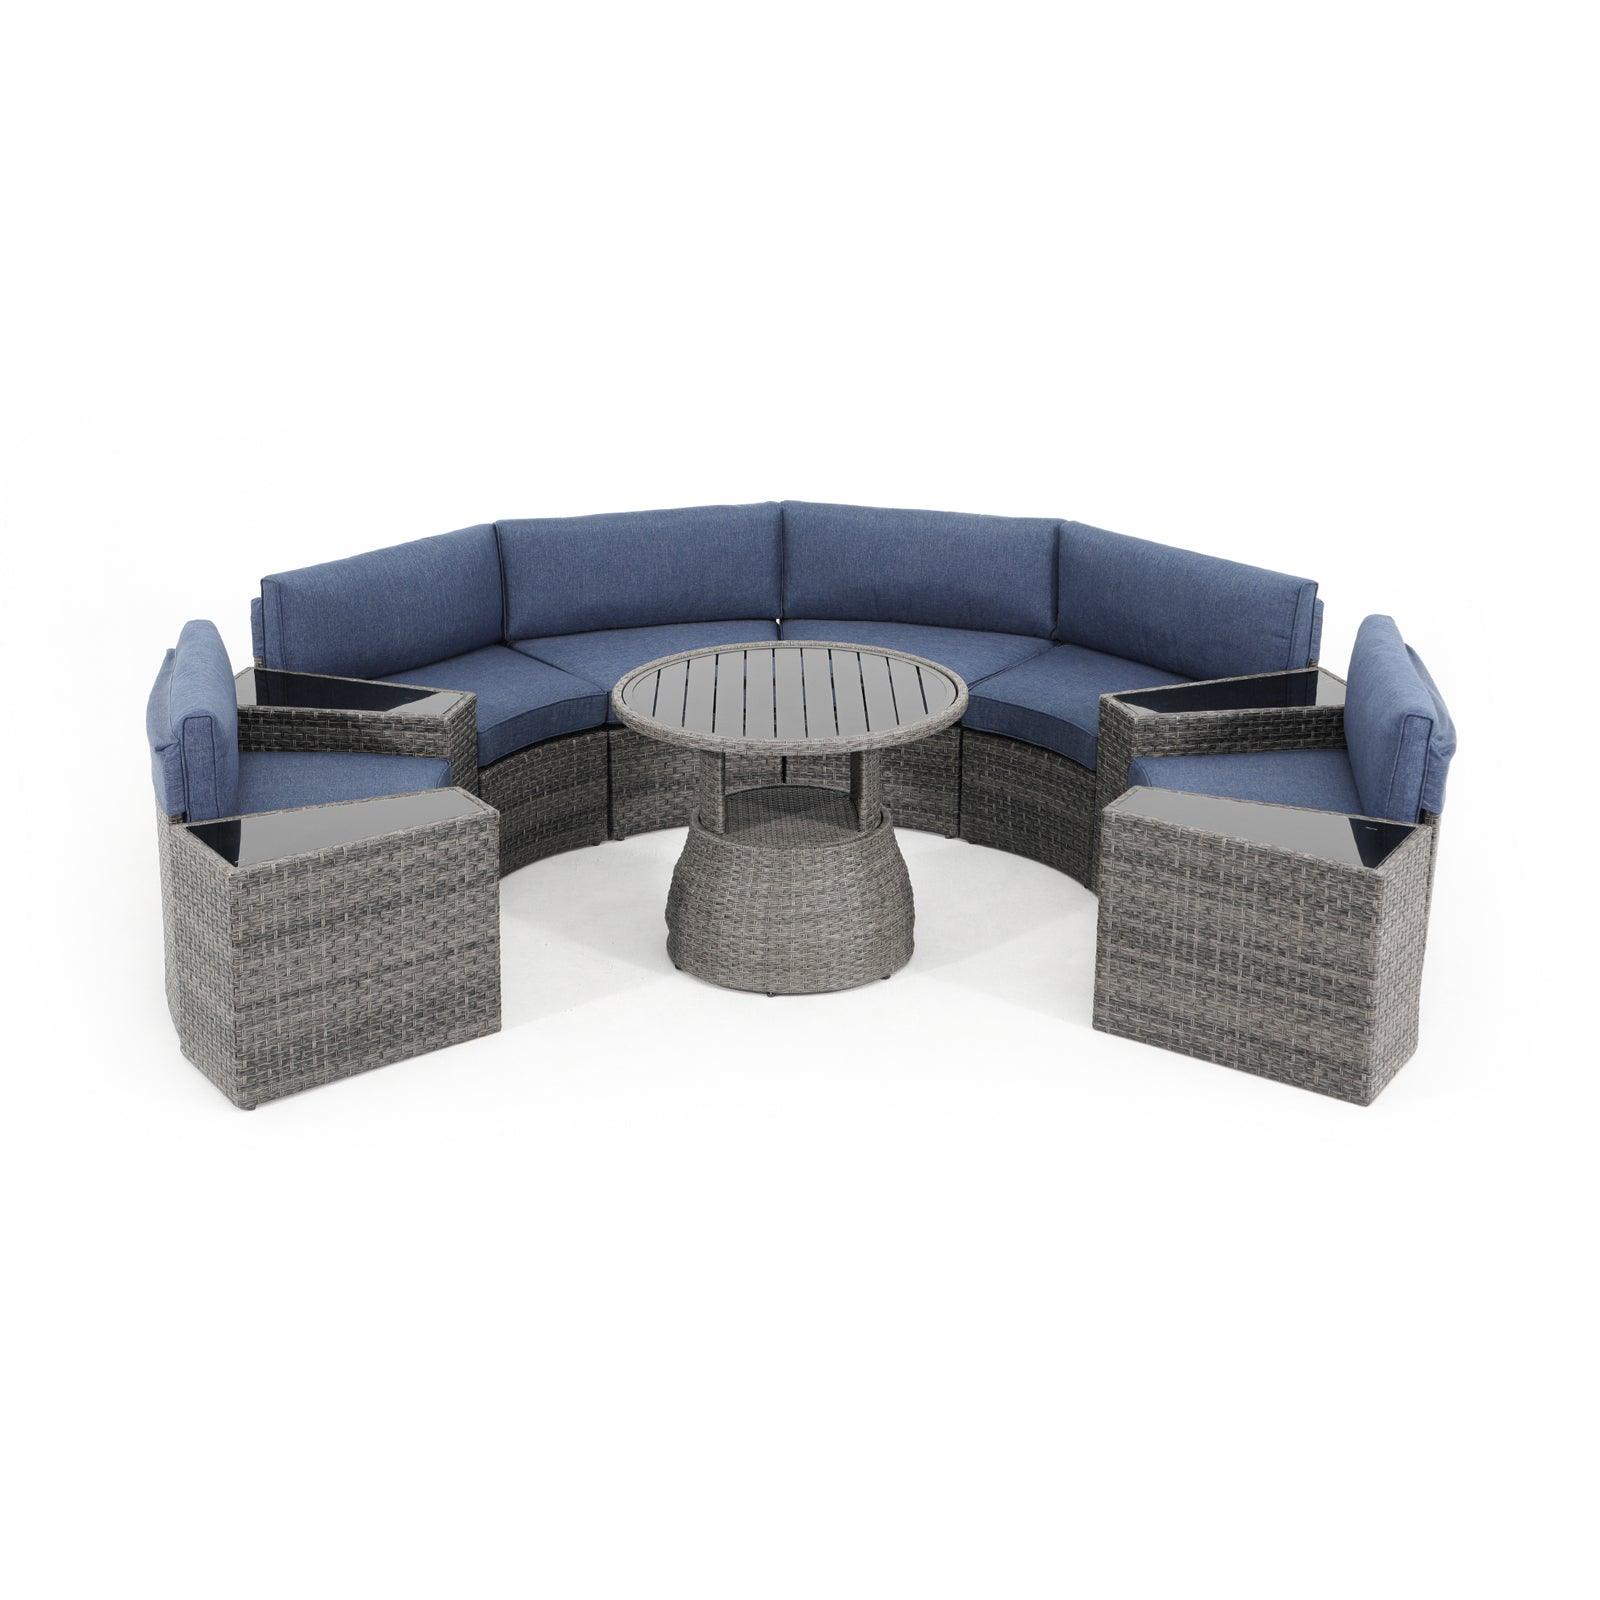 Boboli 6-seater Grey Outdoor Wicker Curved Sectional sofas with navy blue cushions + 4 wicker side tables + 1 Lift-top grey wicker round table, front view - Jardina Furniture#color_Navy Blue